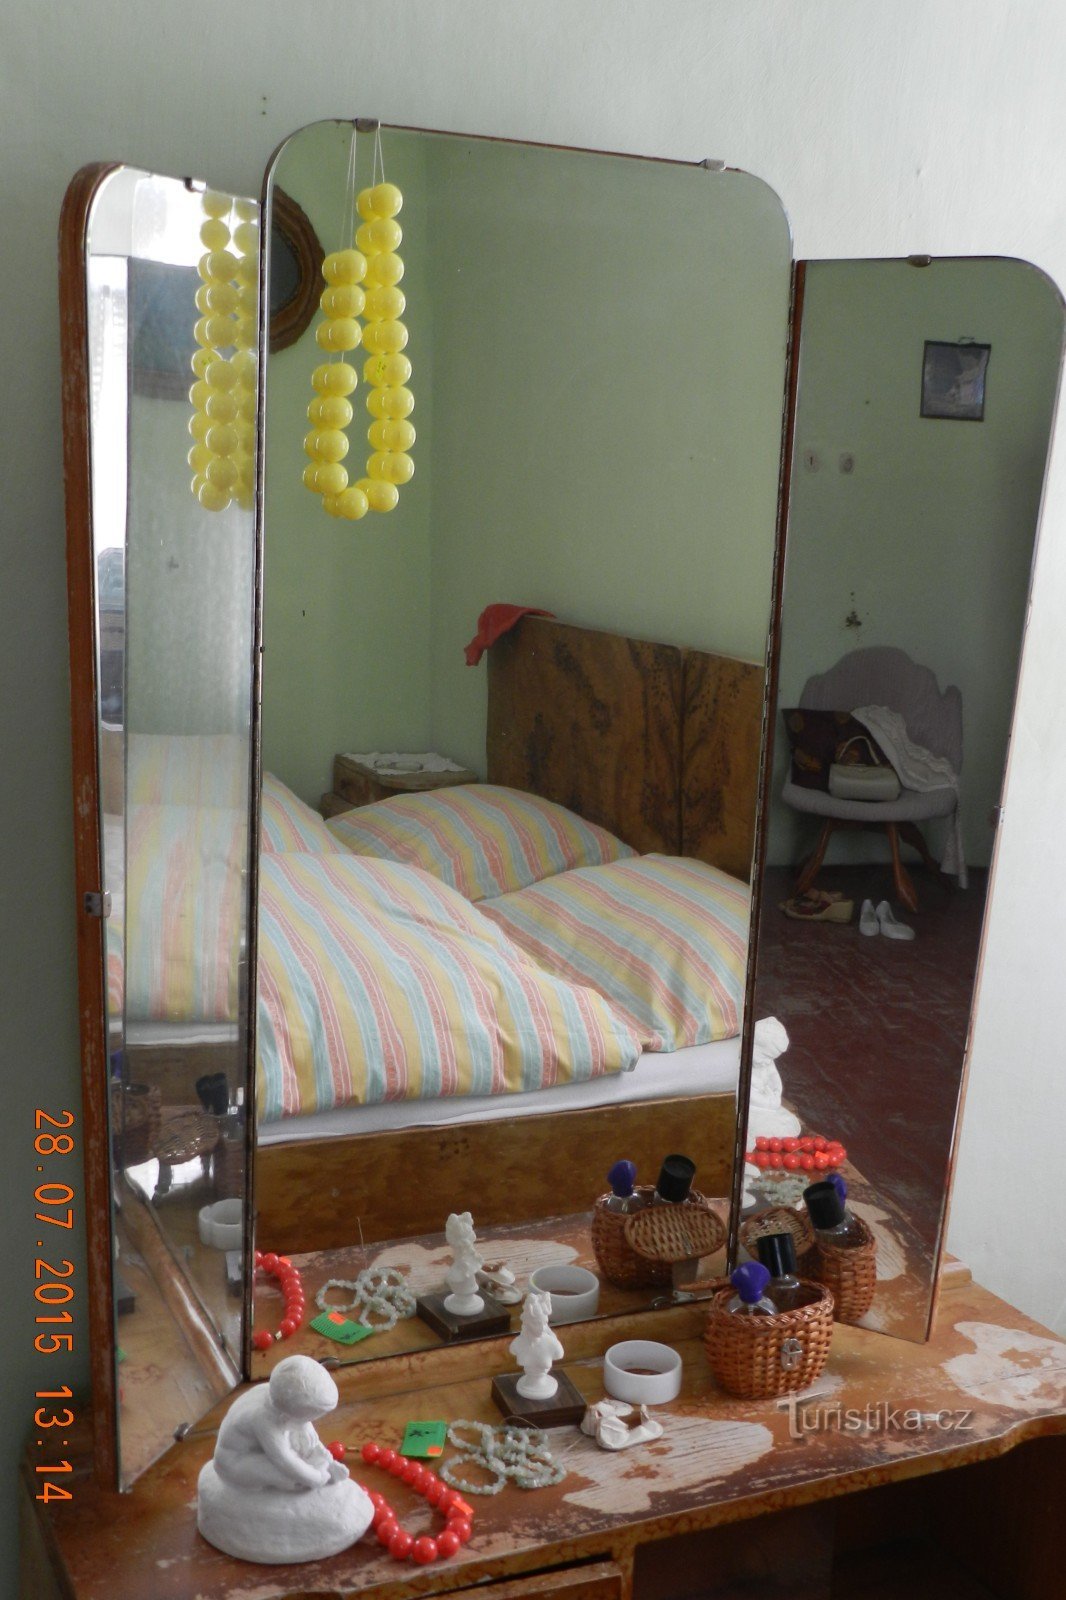 also in the retro museum-mirror in the bedroom